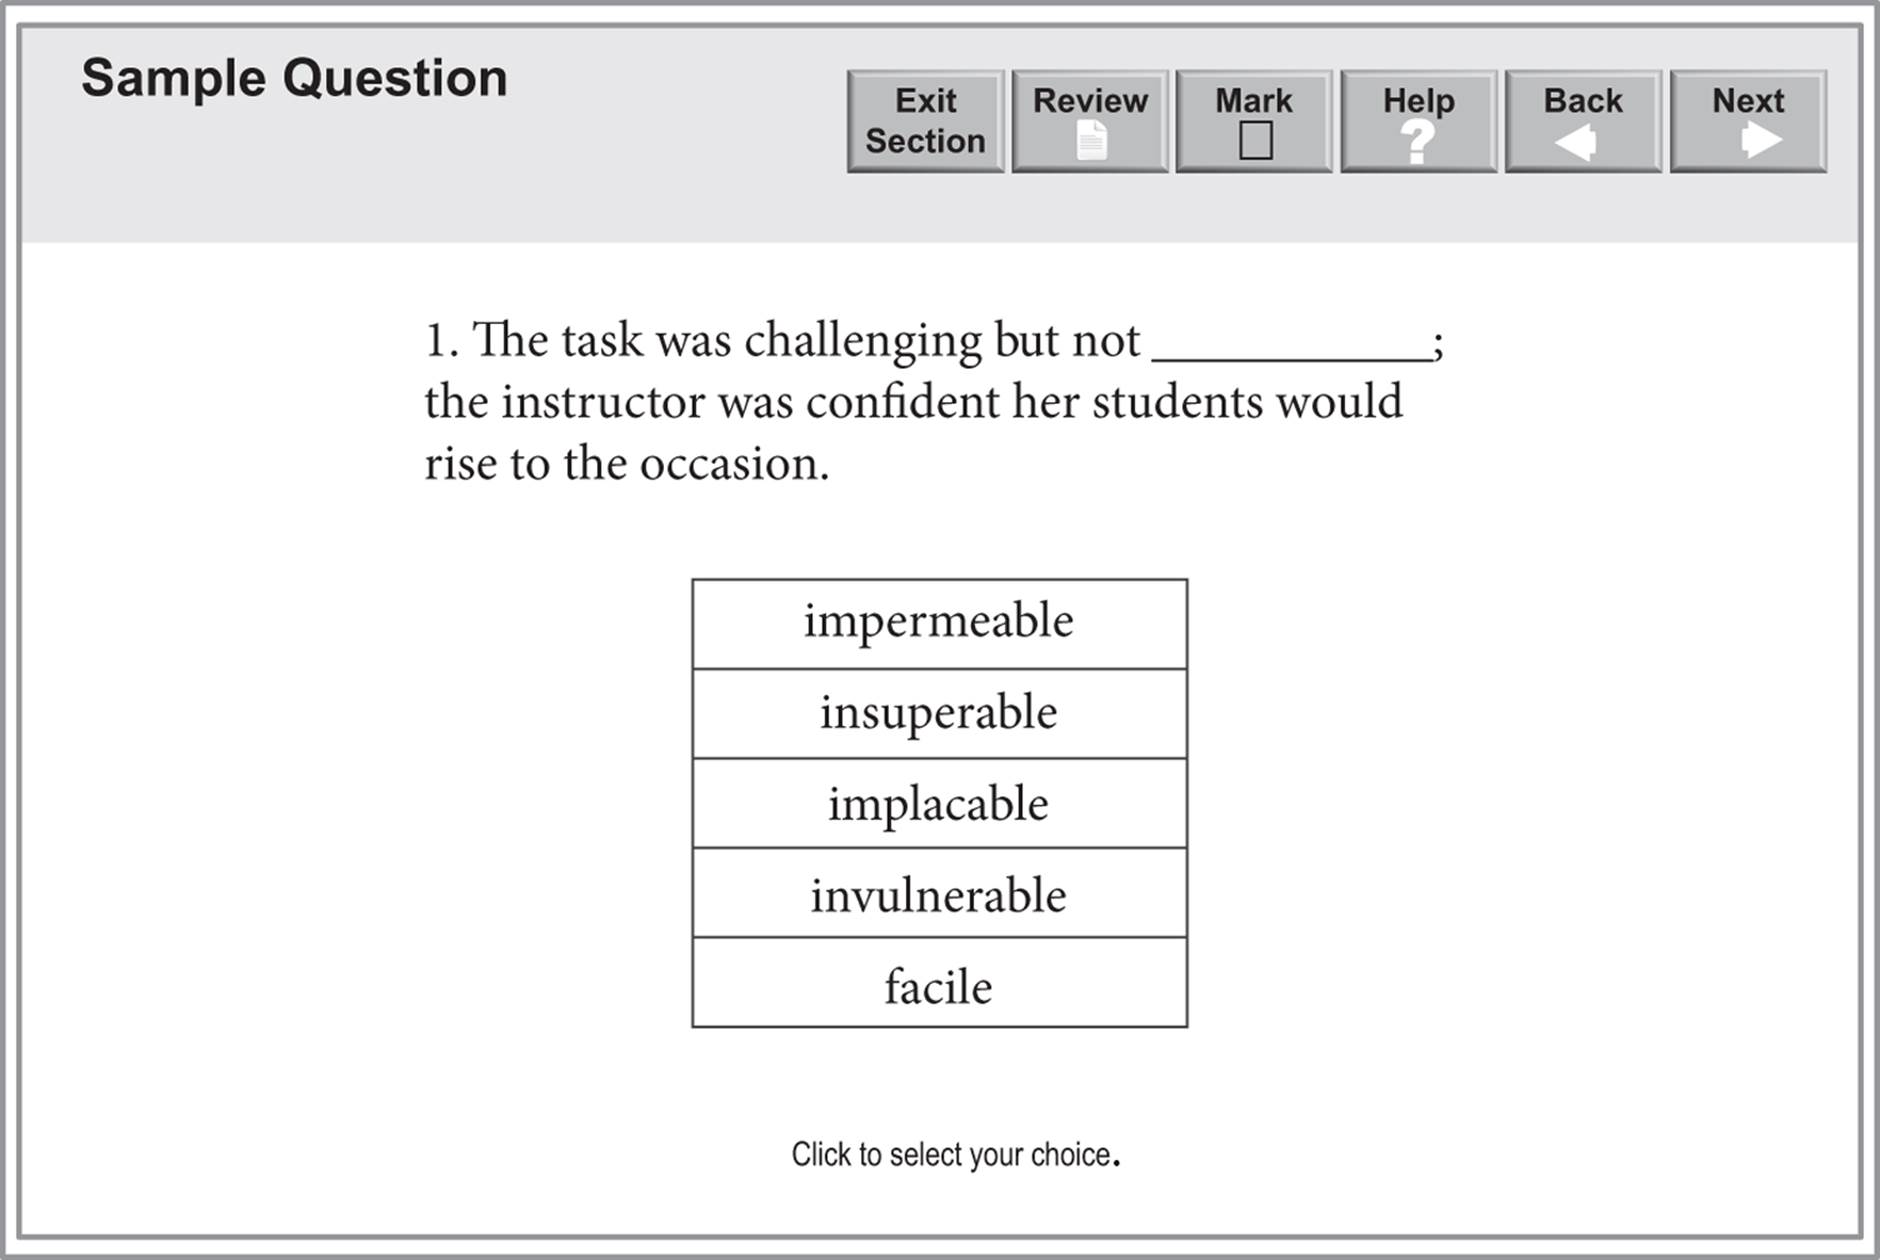 A sample question: "The task was challenging but not blank; the instructor was confident her students would rise to the occasion." There are five choices for the answer: impermeable, insuperable, implacable, invulnerable, and facile.